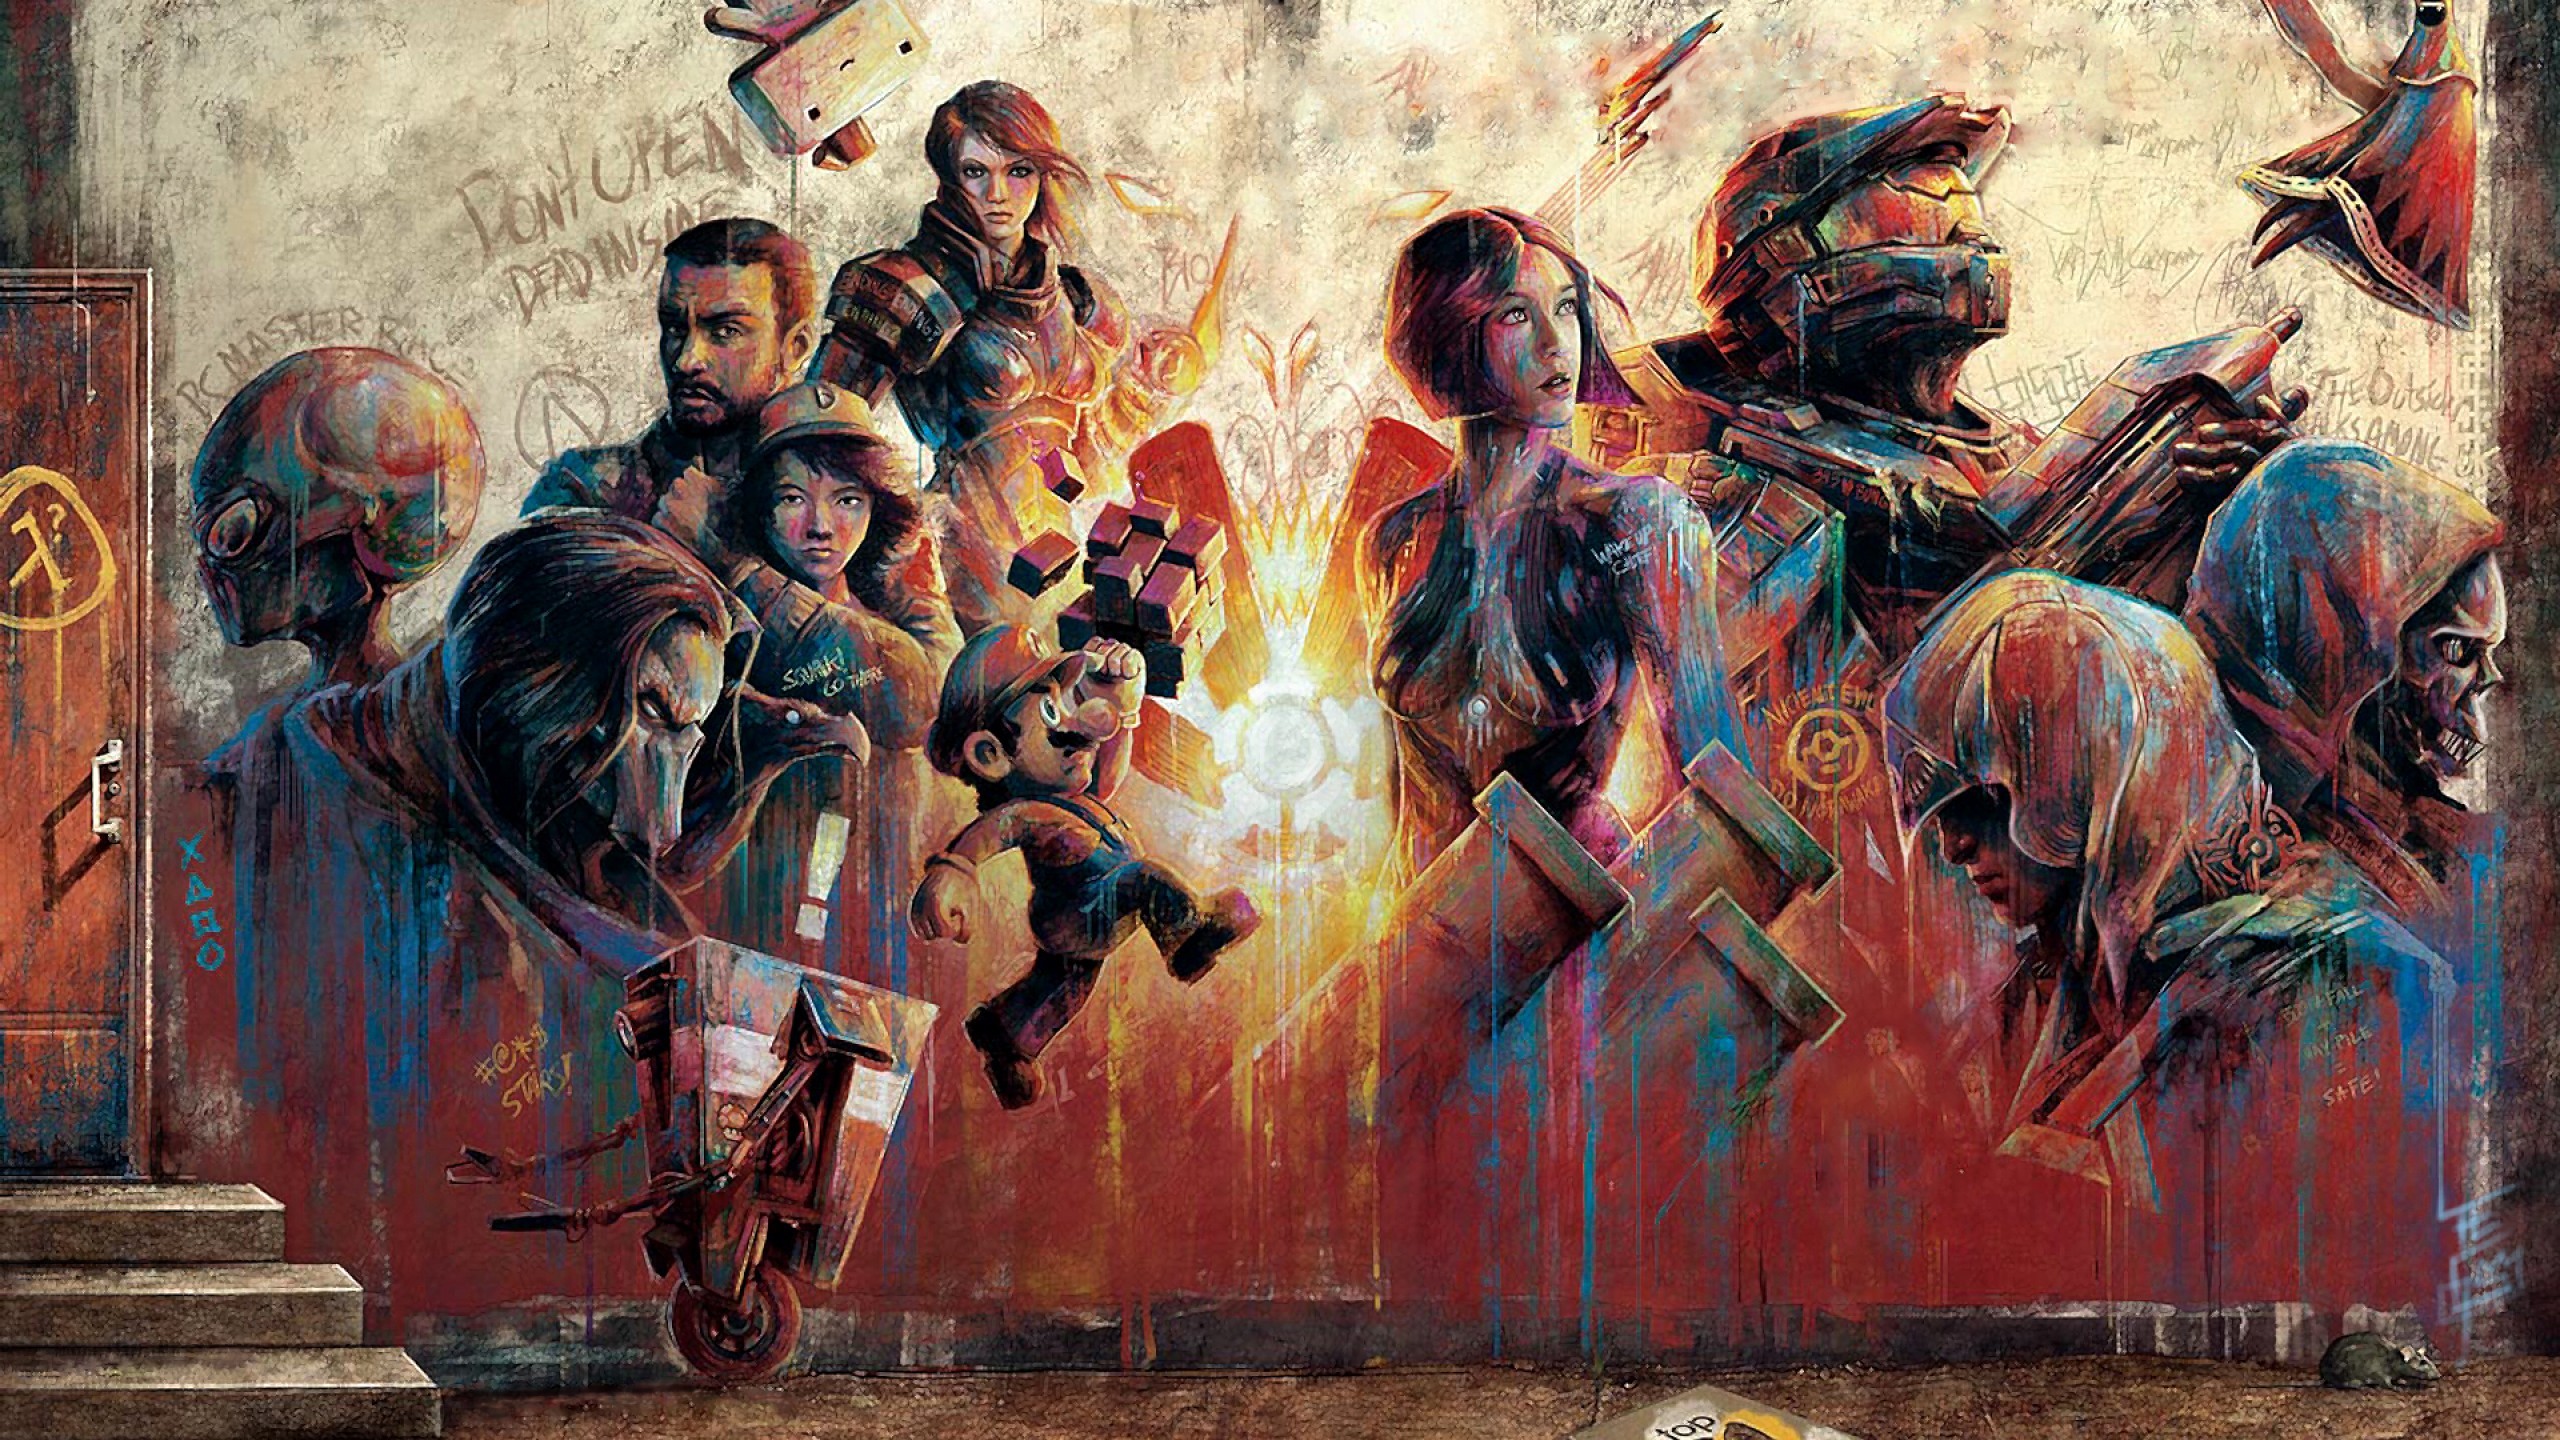 video Games, Mass Effect, Super Mario, Halo 4, Assassins Creed, XCOM: Enemy Unknown, The Walking Dead Wallpaper